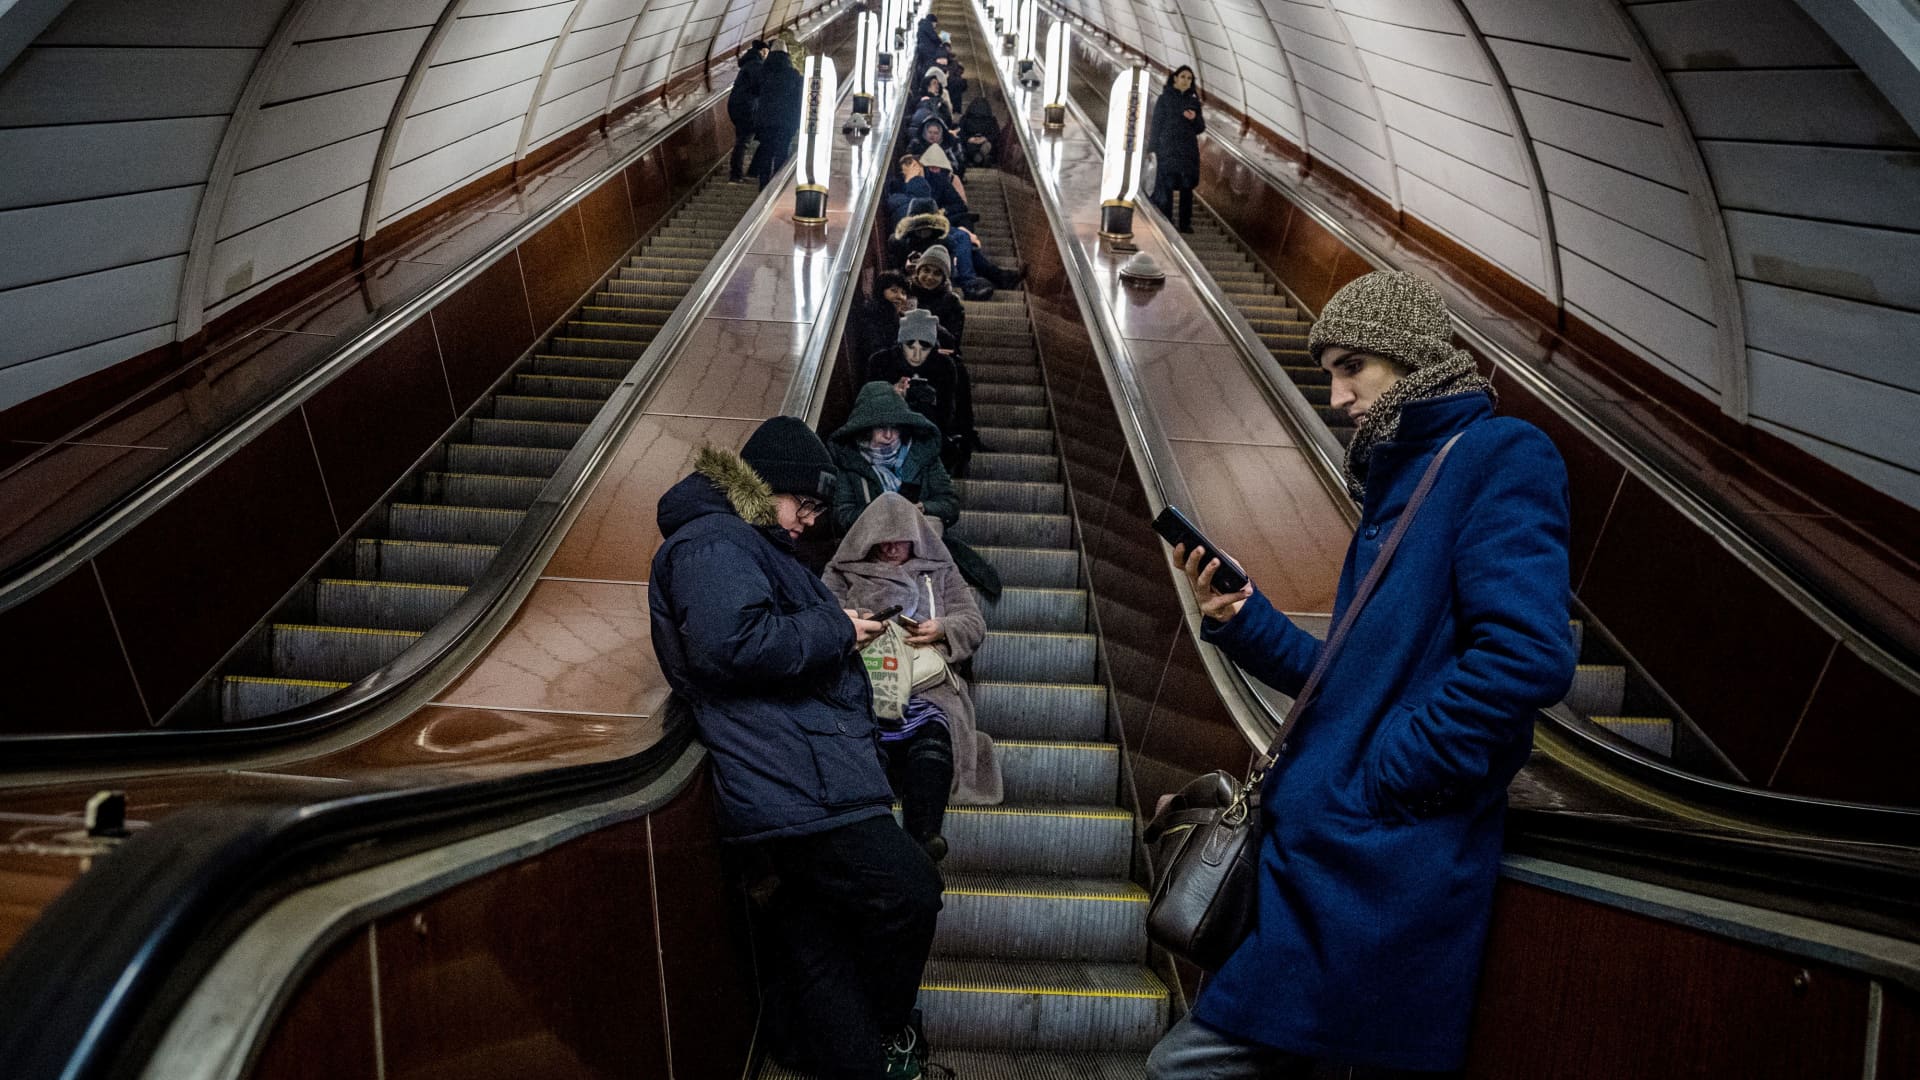 Residents take shelter in a metro station during an air strike alarm in the Ukrainian capital of Kyiv on February 10, 2023, amid the Russian invasion of Ukraine. 